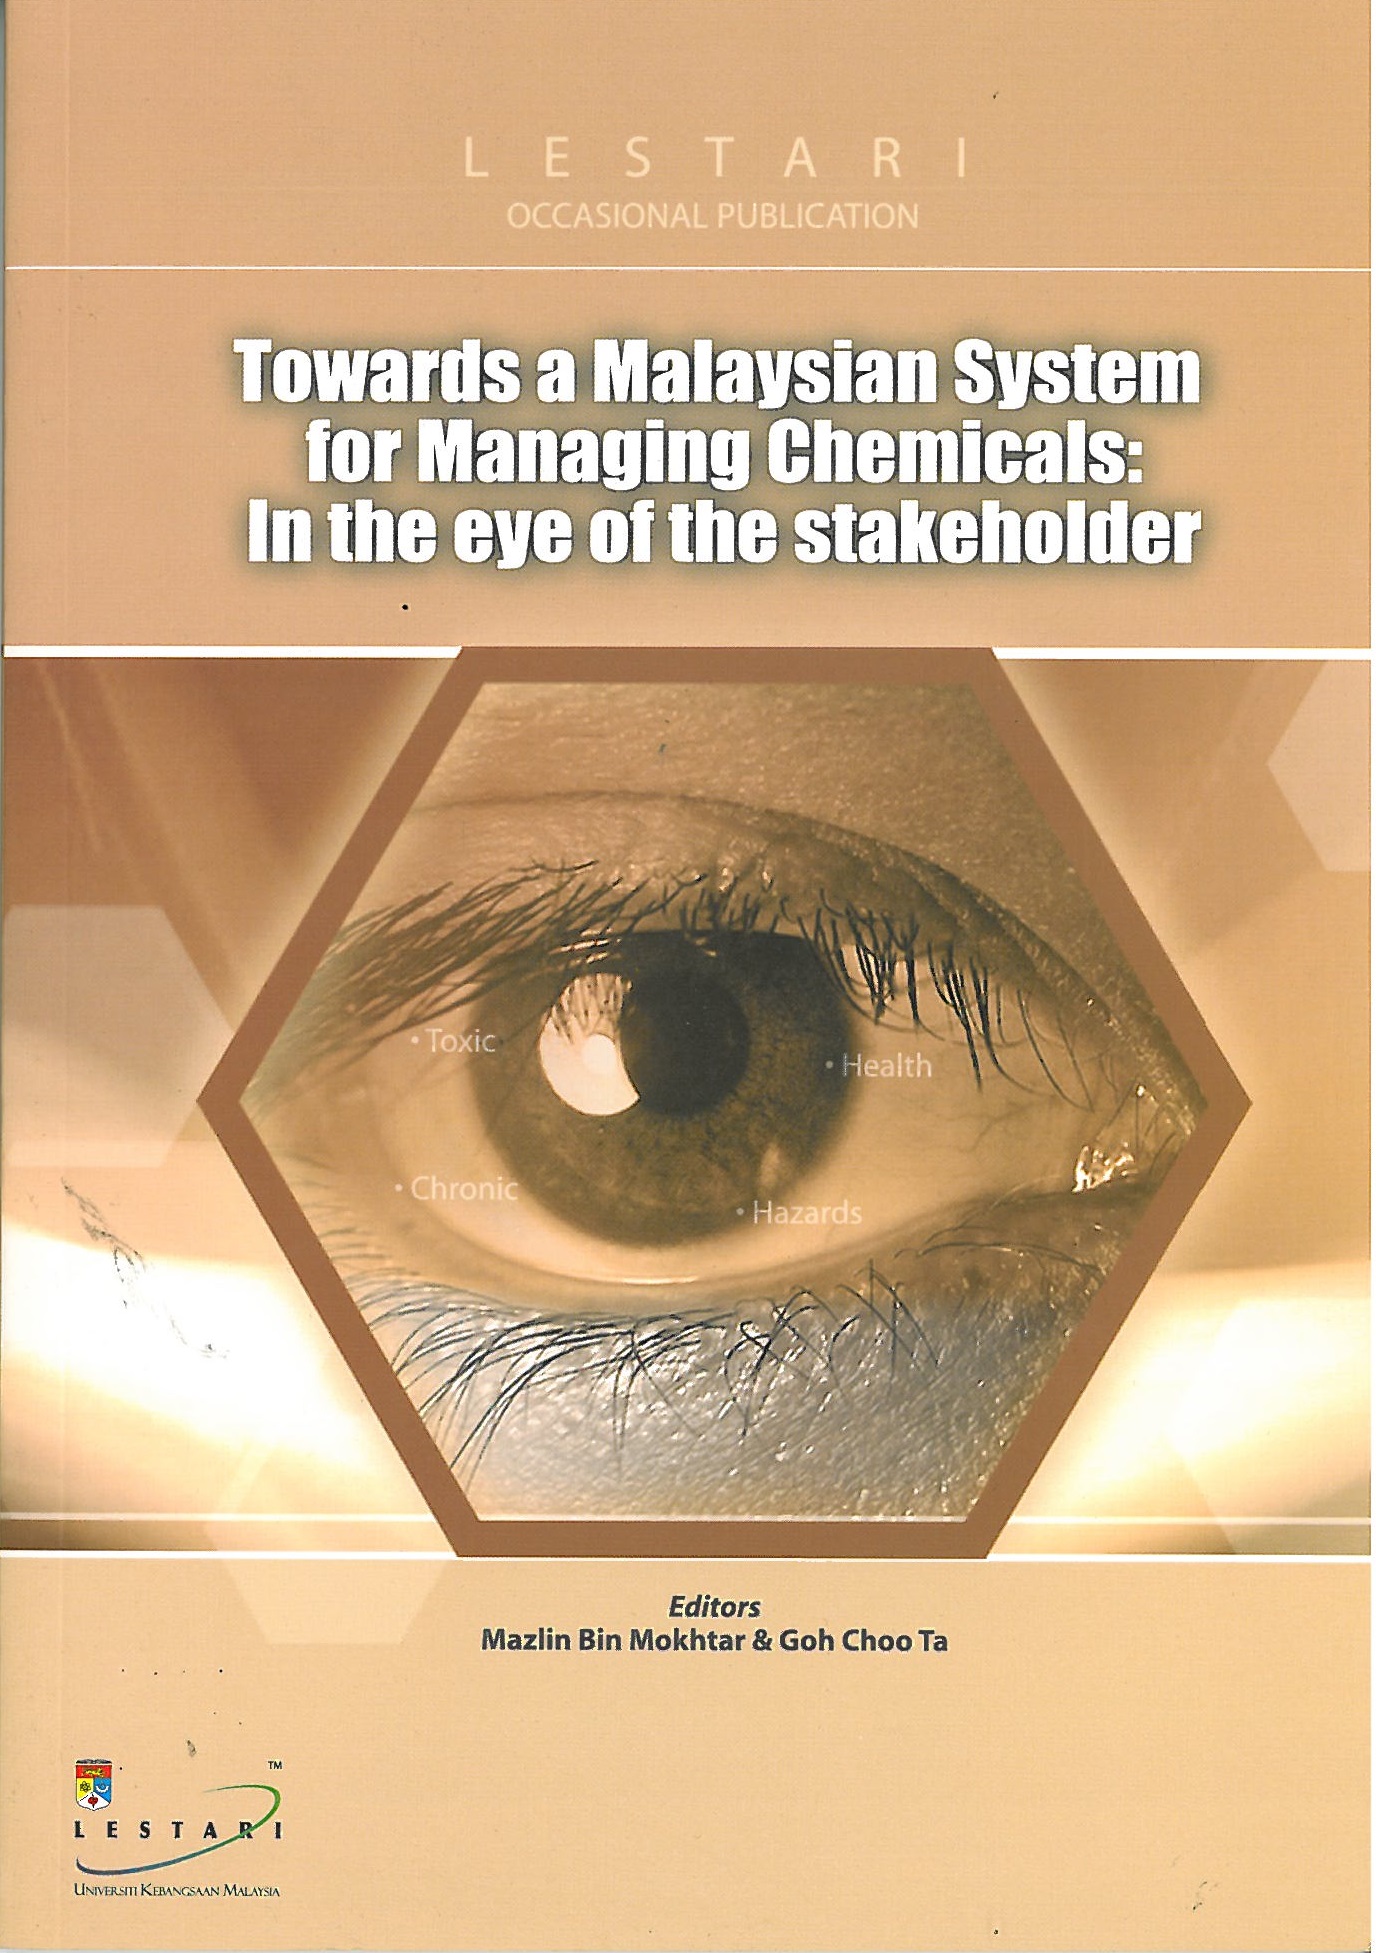 Towards a Malaysian system for Managing Chemicals: In the eye of the stakeholder